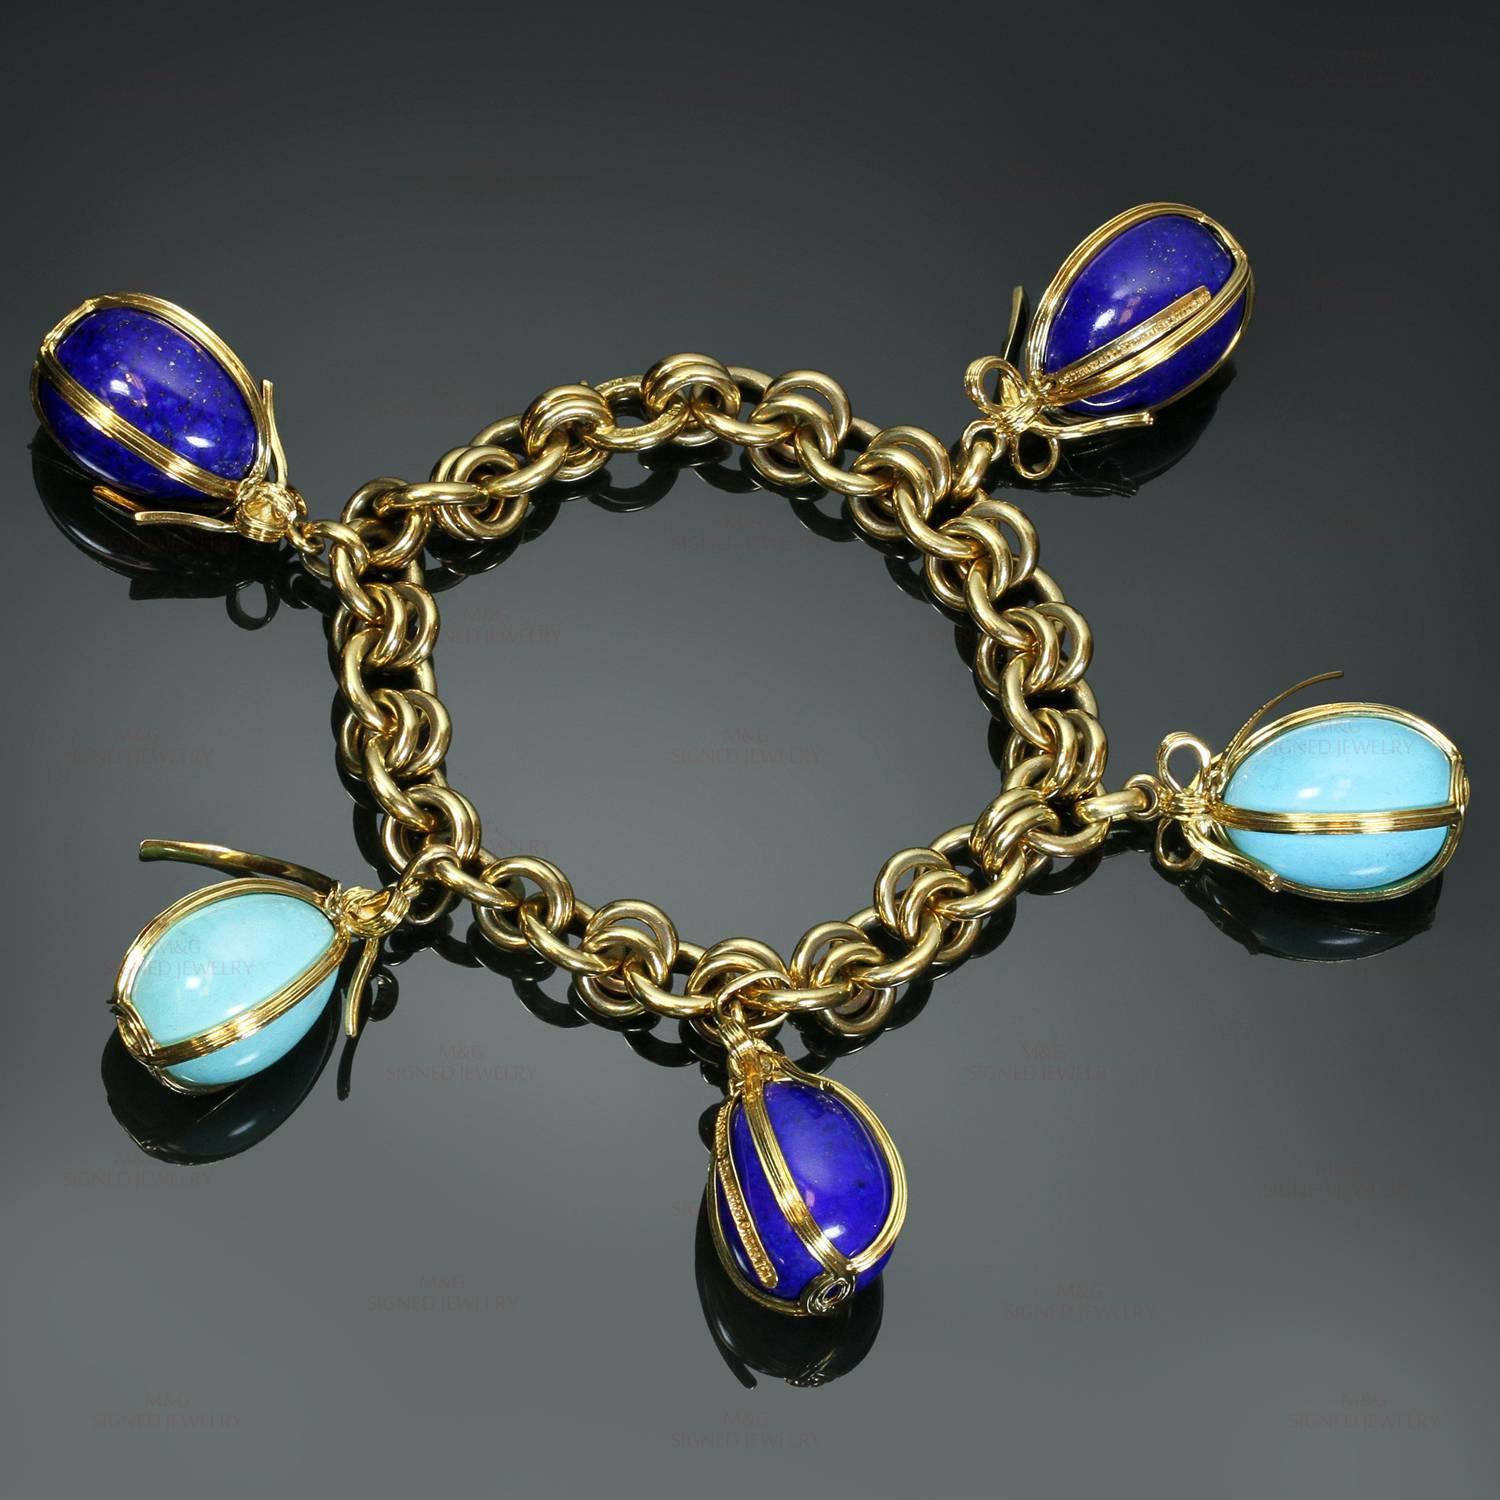 This exquisite Tiffany bracelet designed by Schlumberger is crafted in 18k yellow gold and features 5 genuine turquoise and lapis lazuli egg-shaped charms. Made in United States circa 2000s. Measurements: 7.5